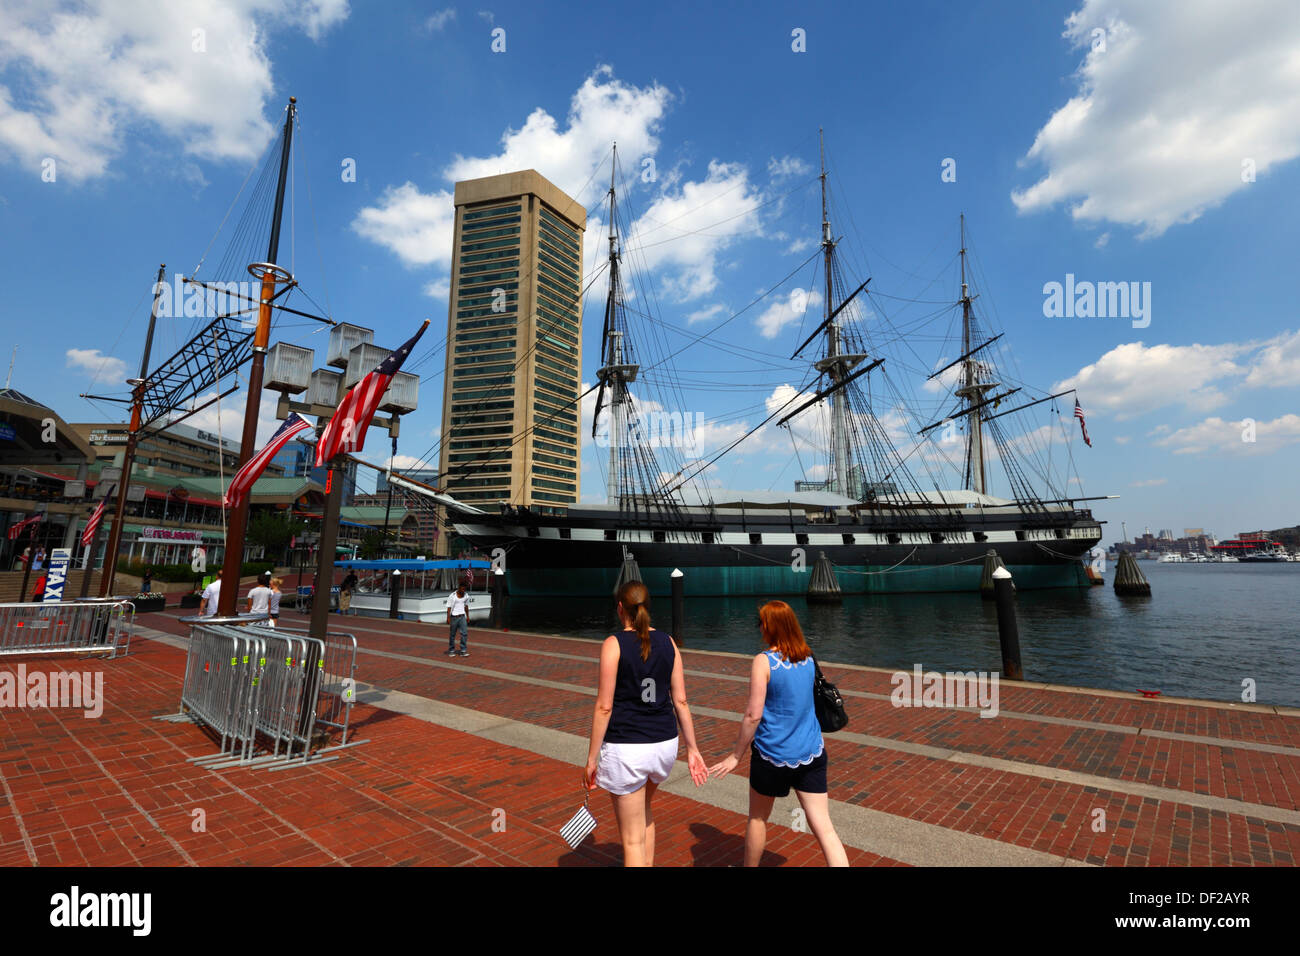 Female tourists, USS Constellation historic sailing ship, World Trade Center building in background, Inner Harbor, Baltimore City, Maryland, USA Stock Photo